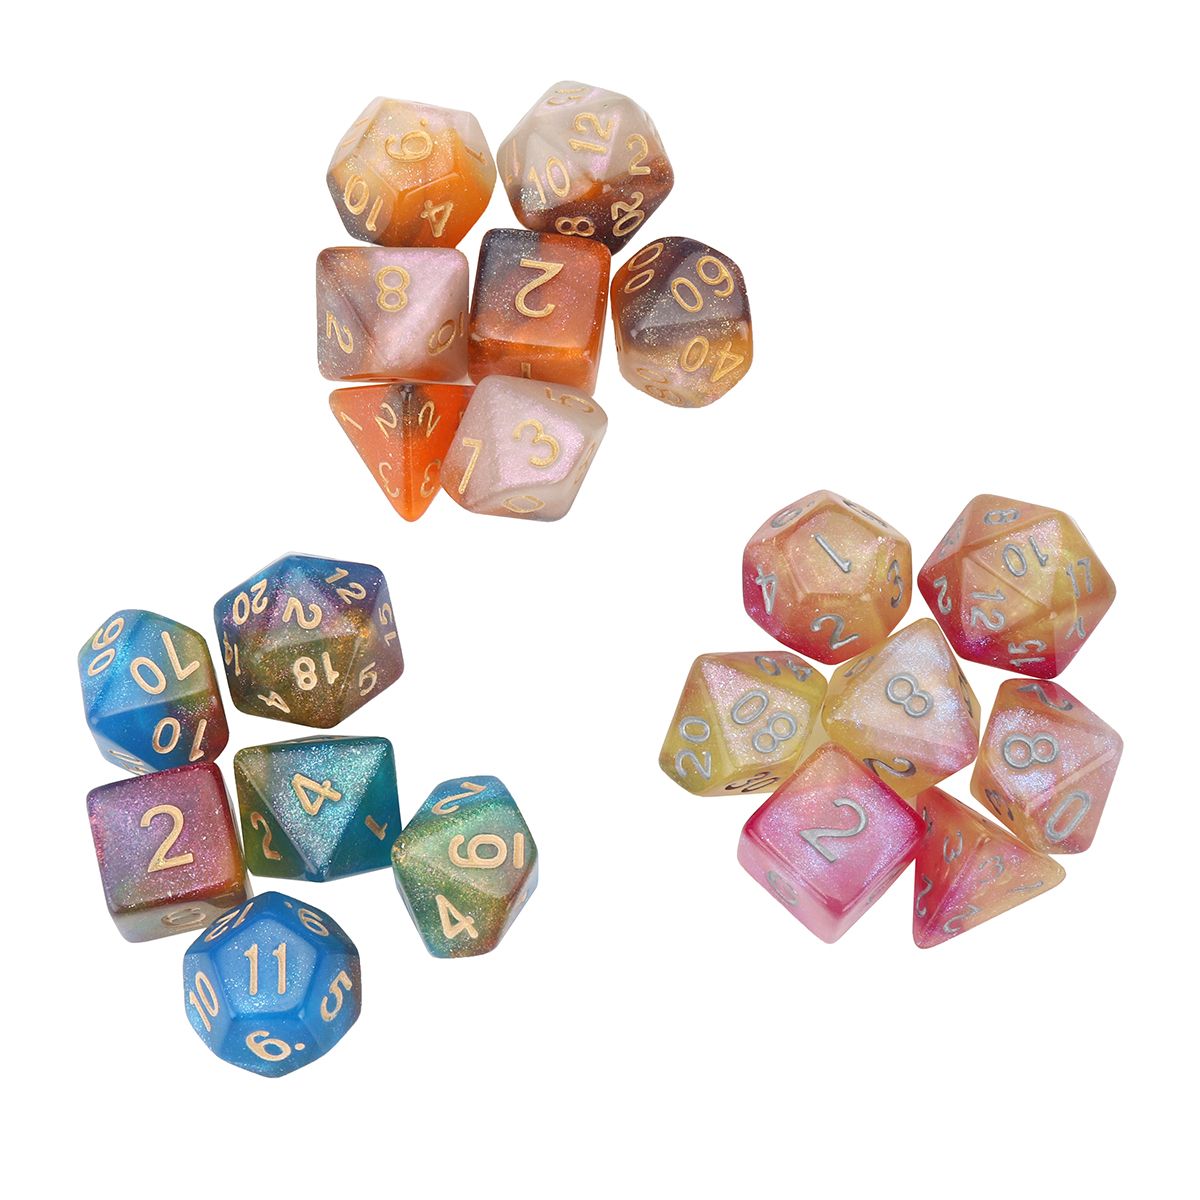 7Pcs-Polyhedral-Dice-Set-Board-Game-Multisided-Dices-Gadget-Acrylic-Polyhedral-Dices-Role-Playing-Ga-1700348